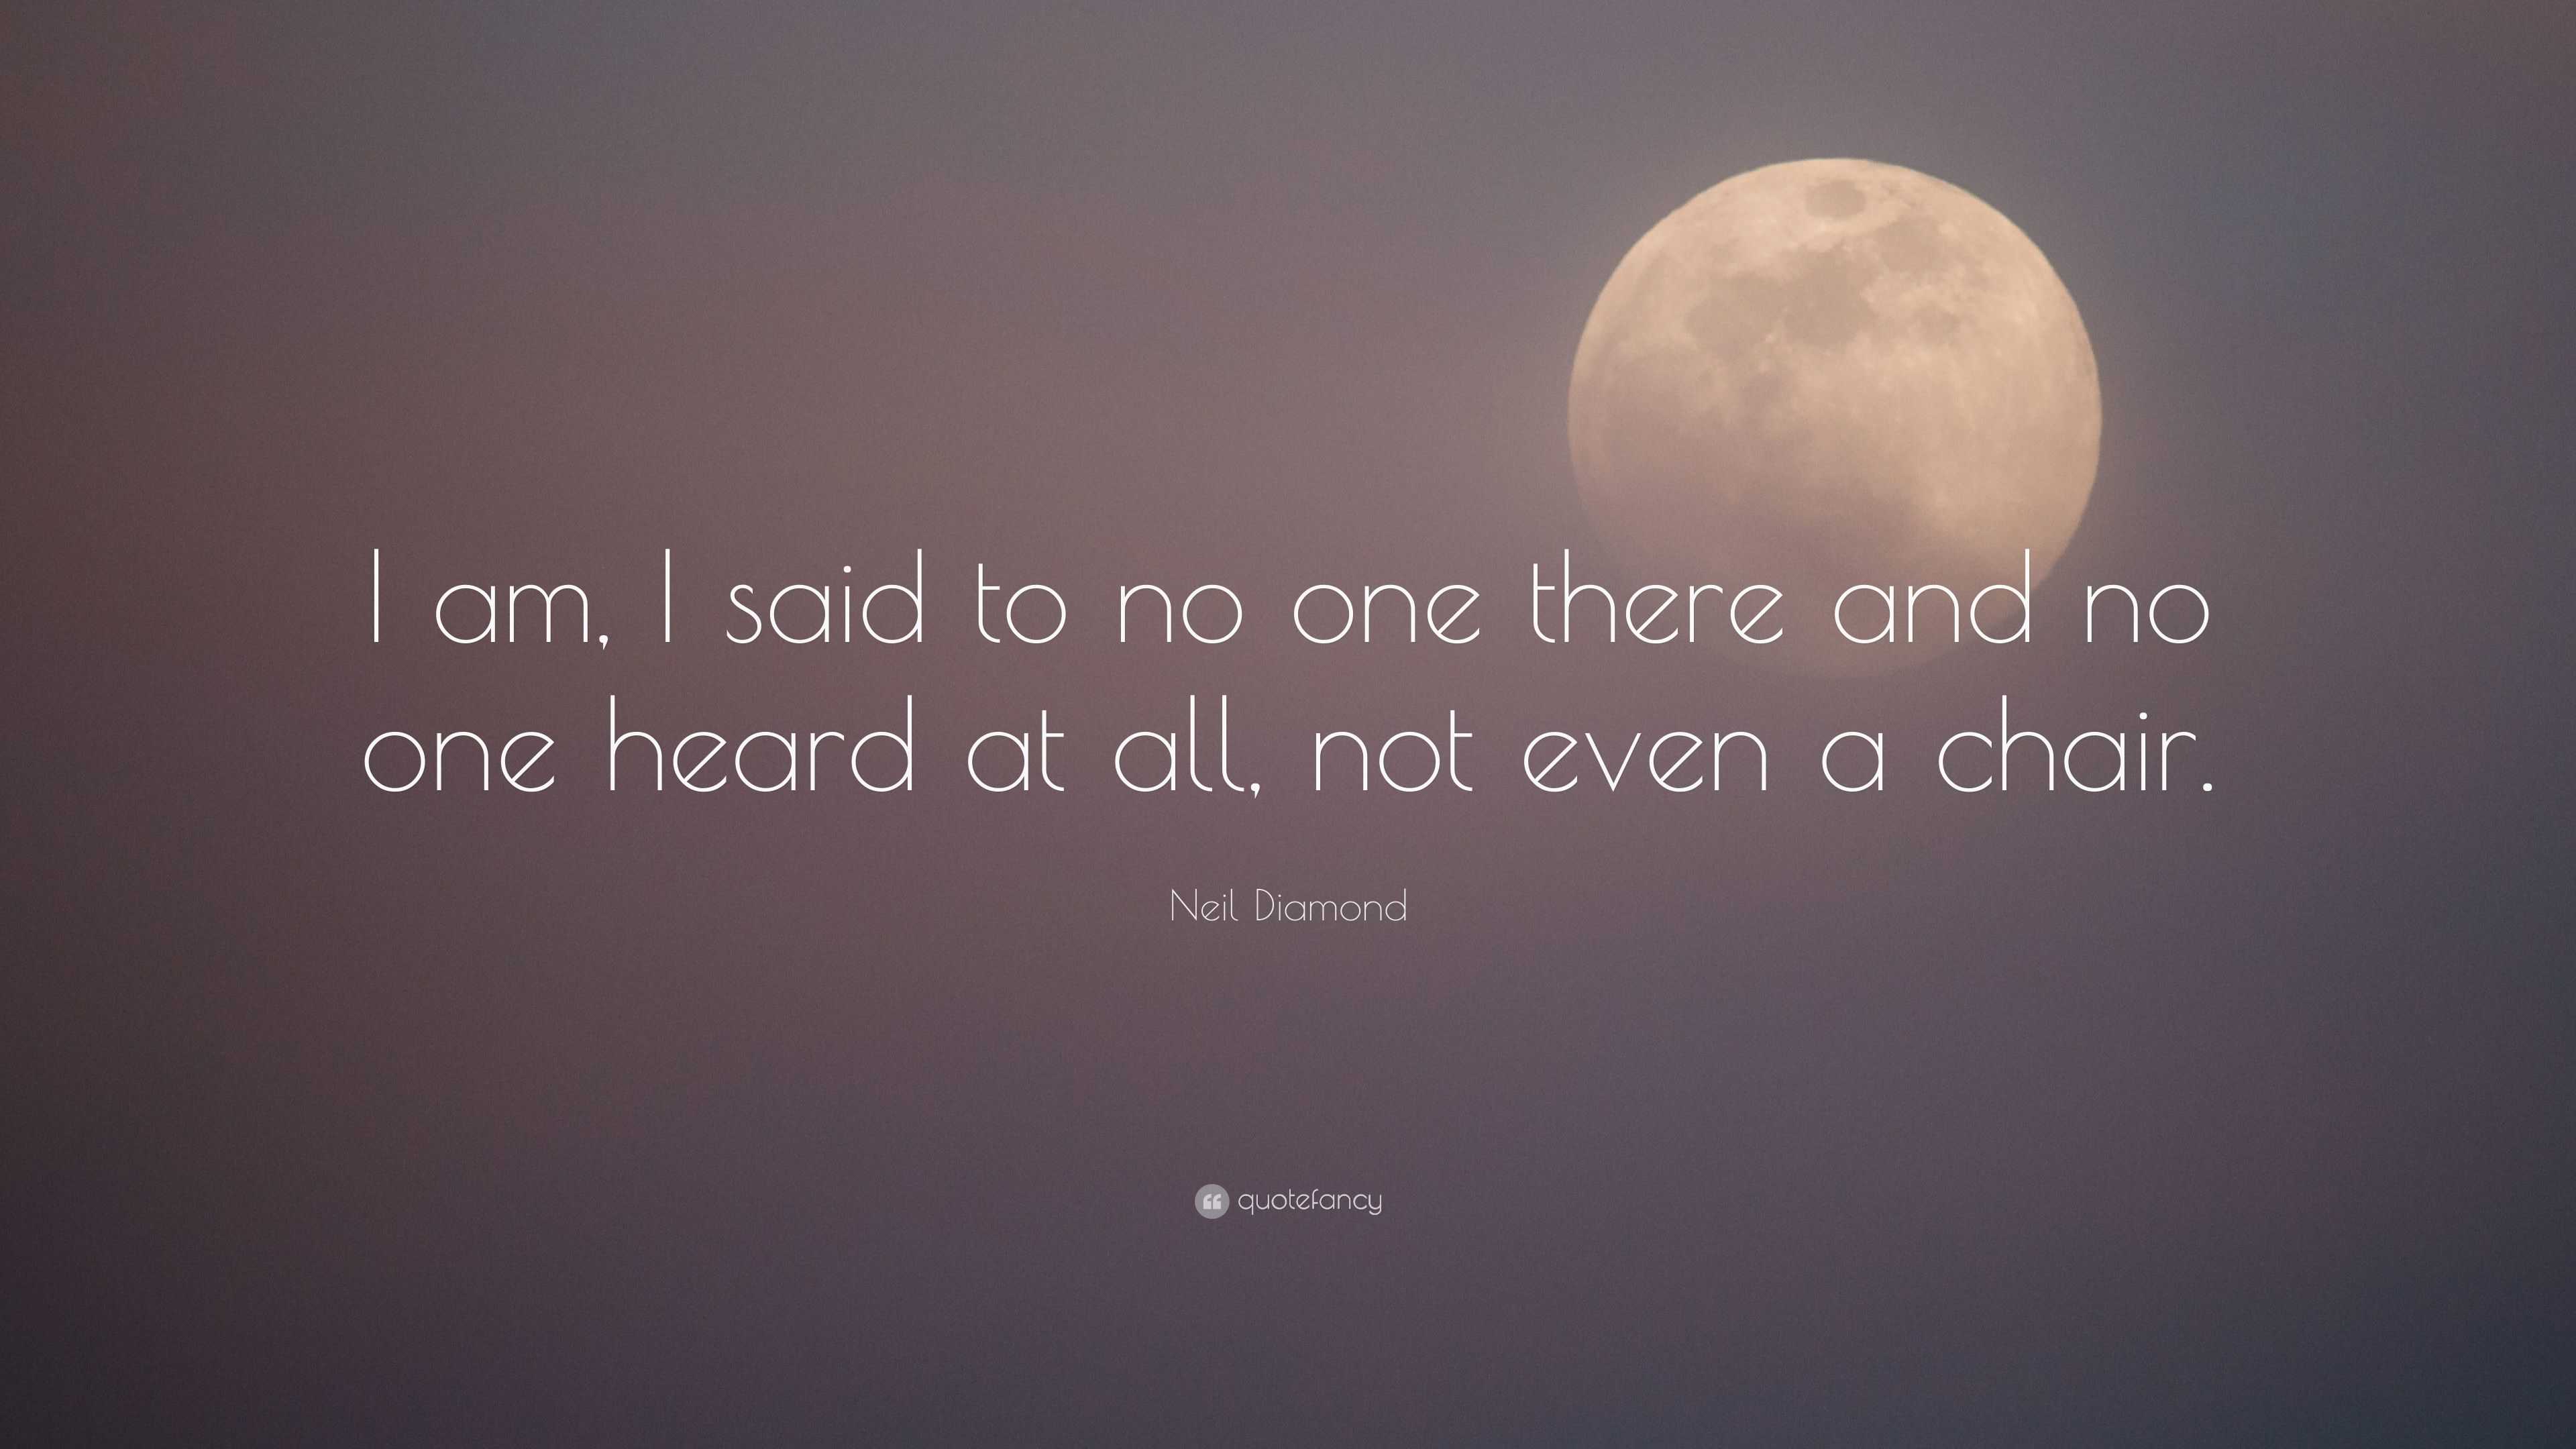 Neil Diamond Quote I Am I Said To No One There And No One Heard